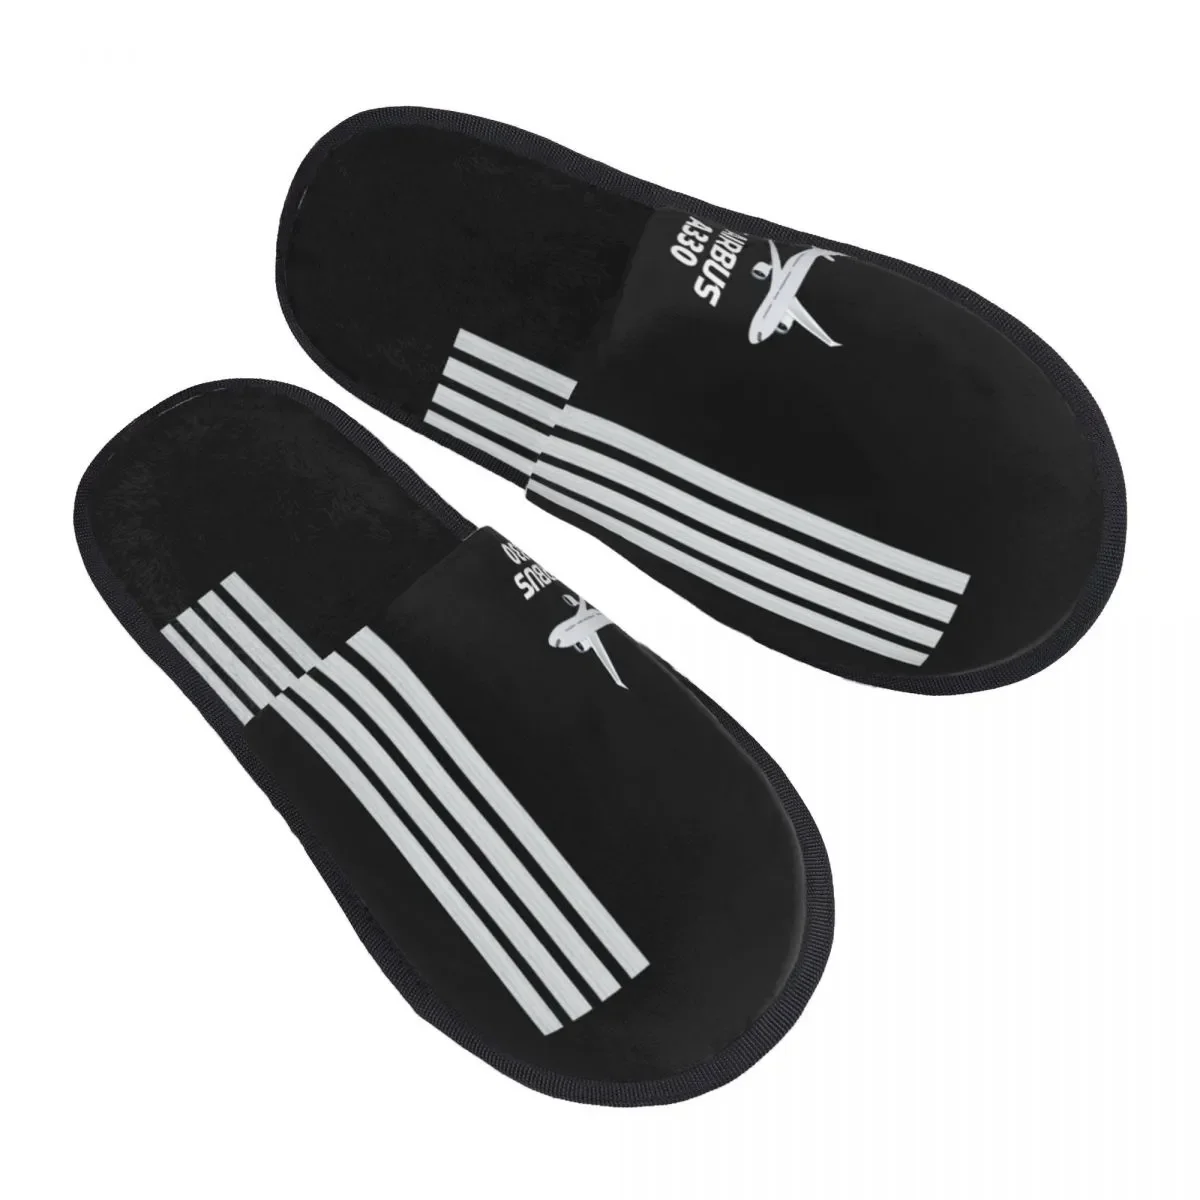 

Airbus A330 Captain Stripes House Slippers Women Comfy Memory Foam Pilot Aviation Aviator Airplane Slip On Bedroom Slipper Shoes